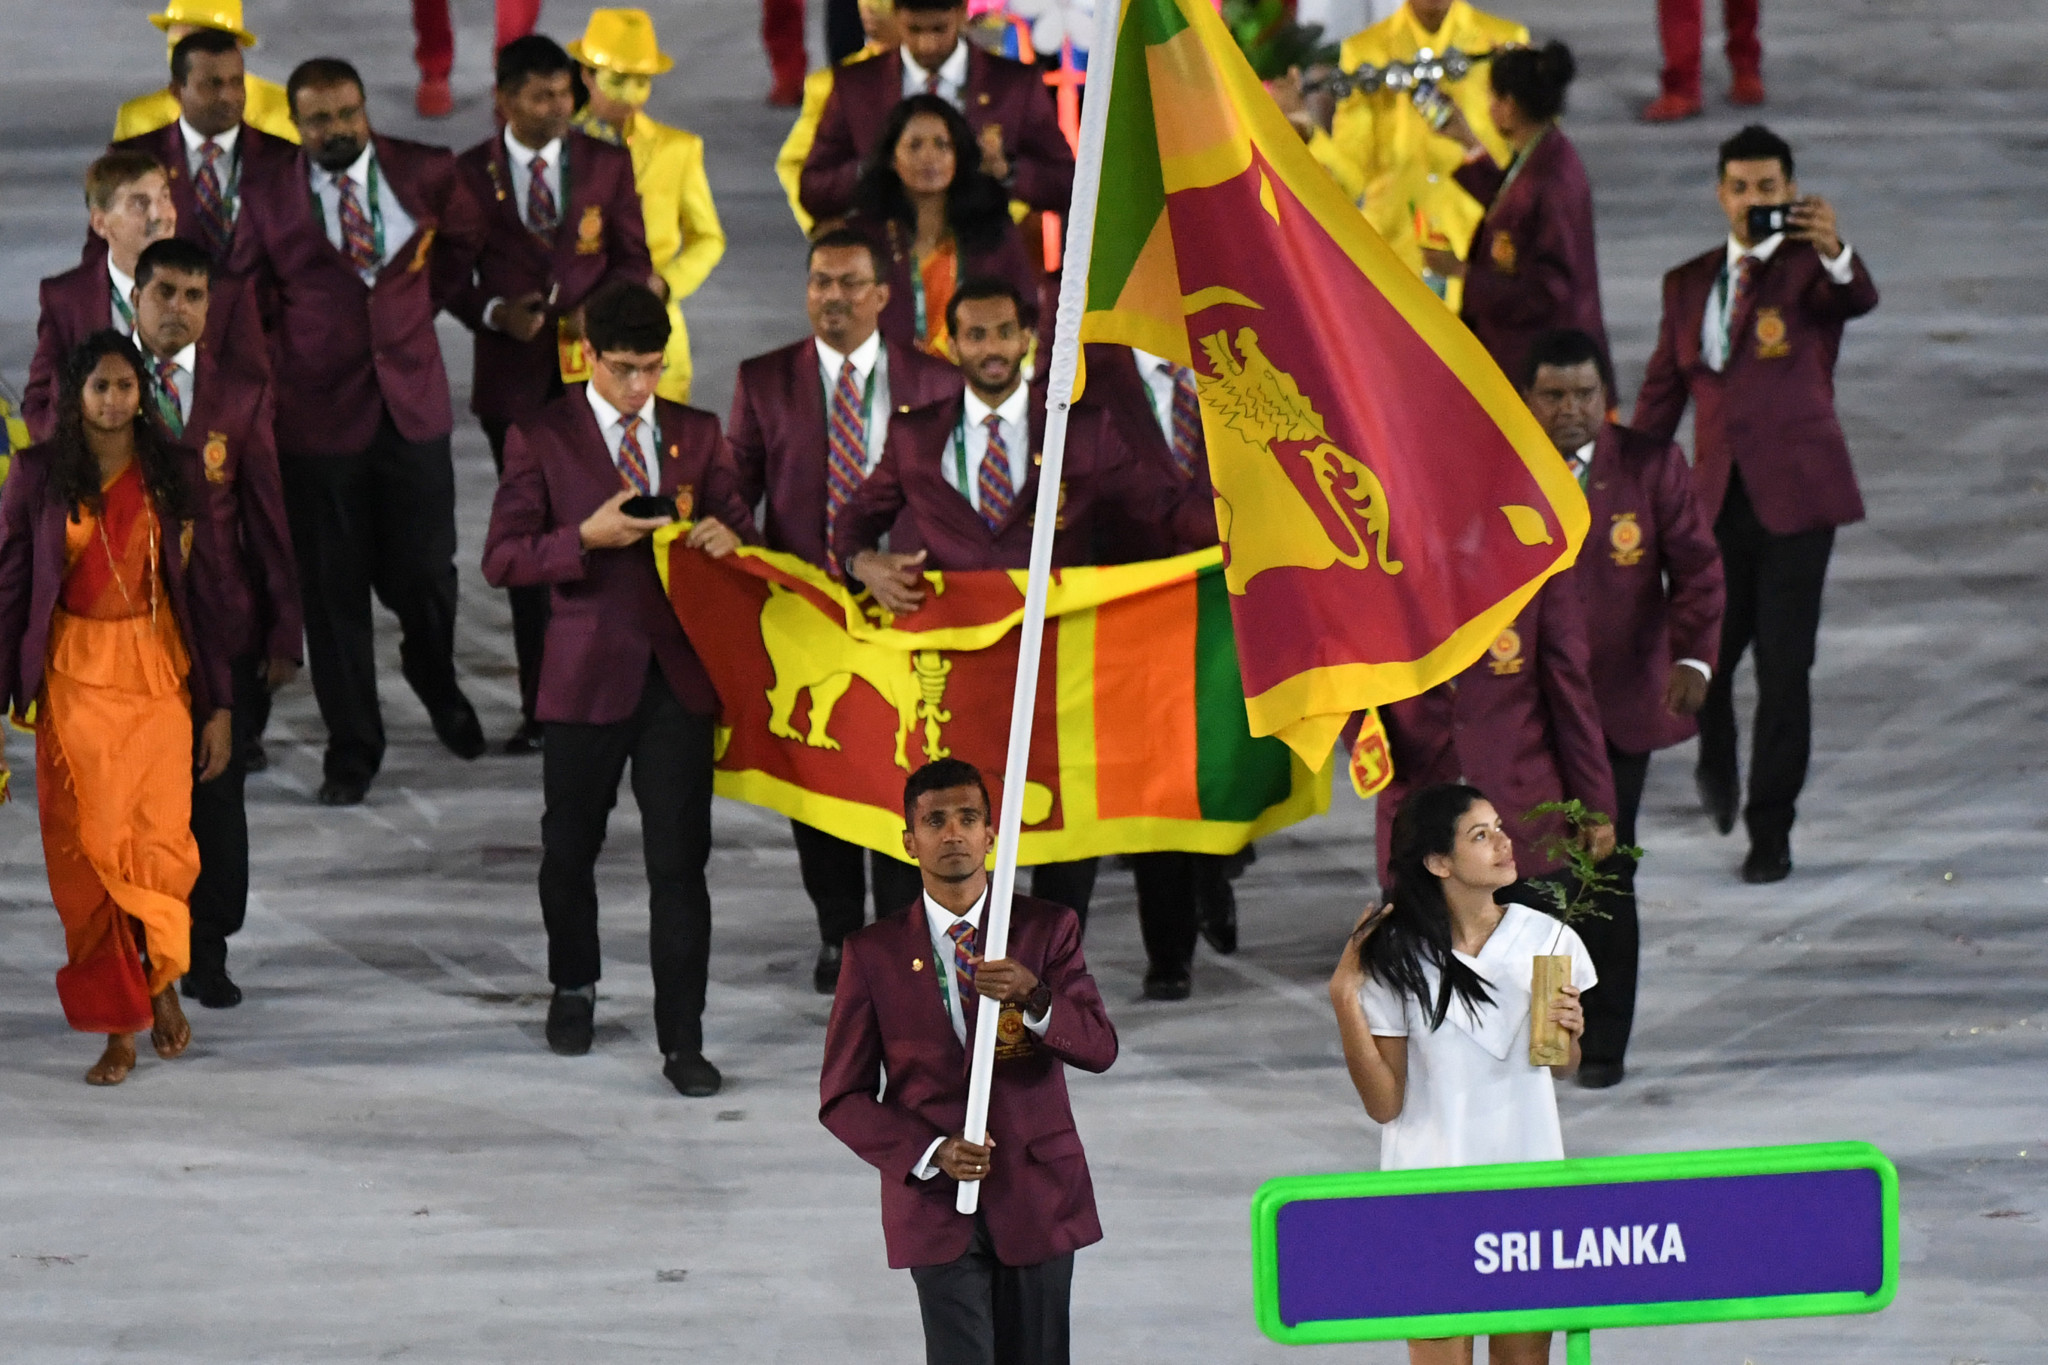 Sri Lanka are preparing for making their 18th Summer Olympic Games appearance at Tokyo 2020 ©Getty Images